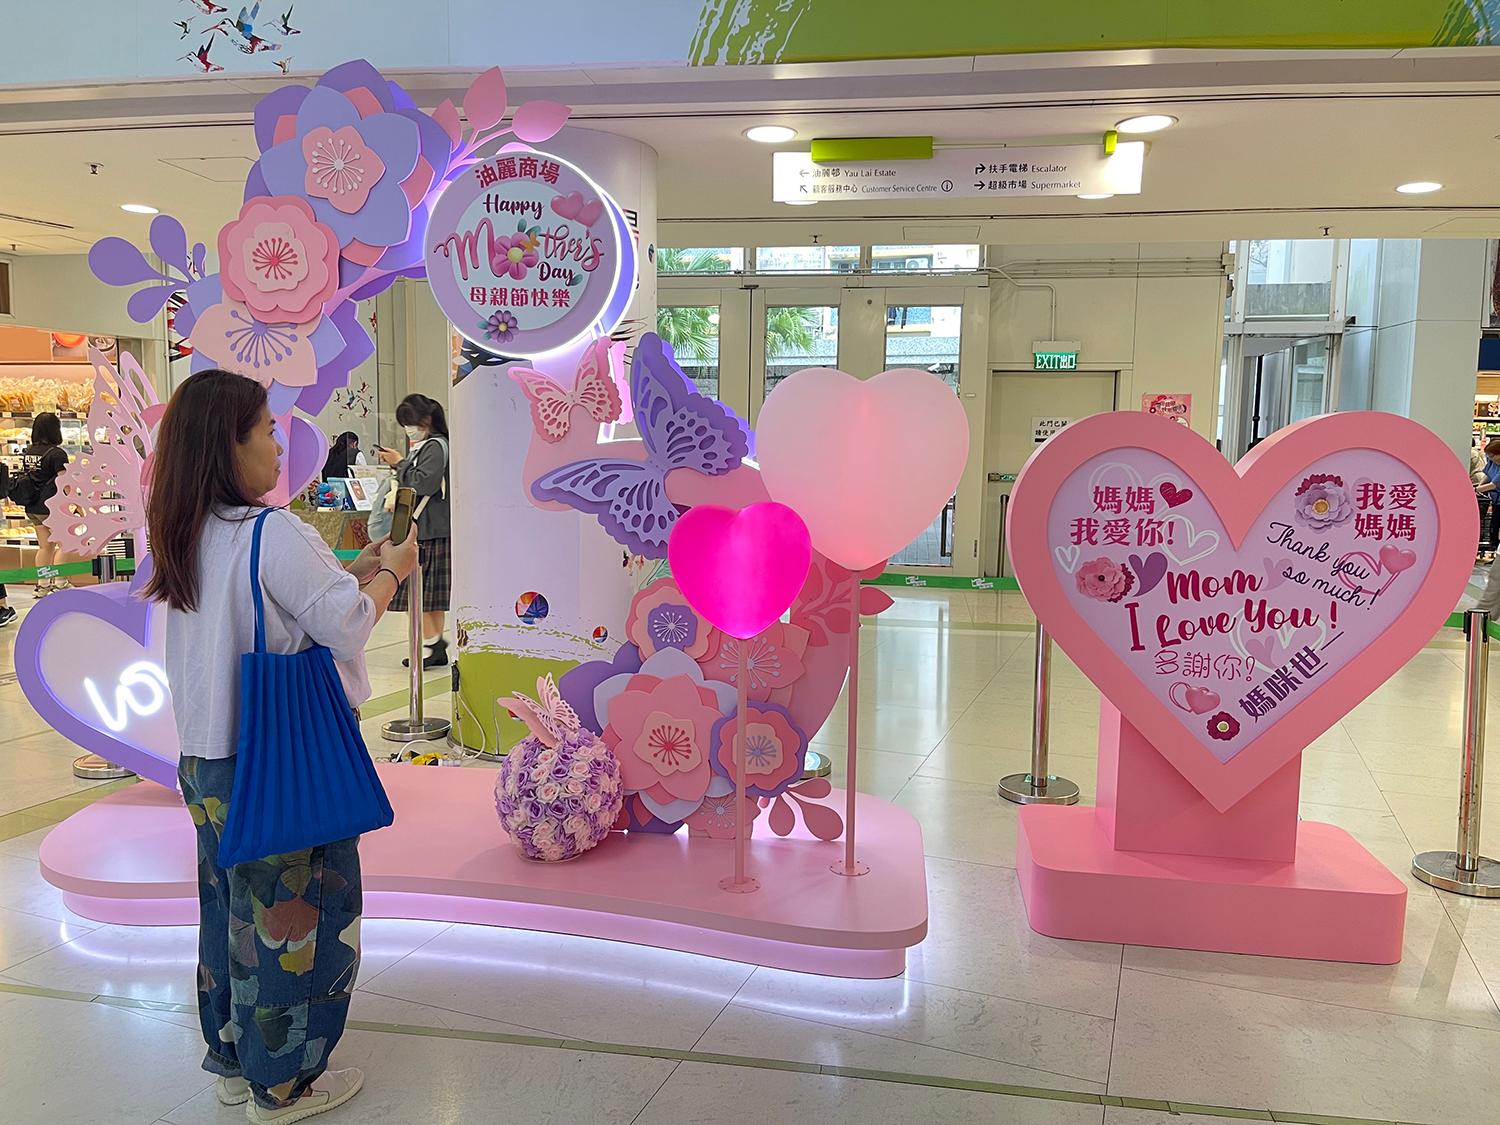 The Hong Kong Housing Authority (HA) will launch promotions in its shopping centres for Mother's Day to express gratitude to mothers and boost patronage.  Photo shows decorations for Mother's Day at the HA's Yau Lai Shopping Centre, Yau Tong.